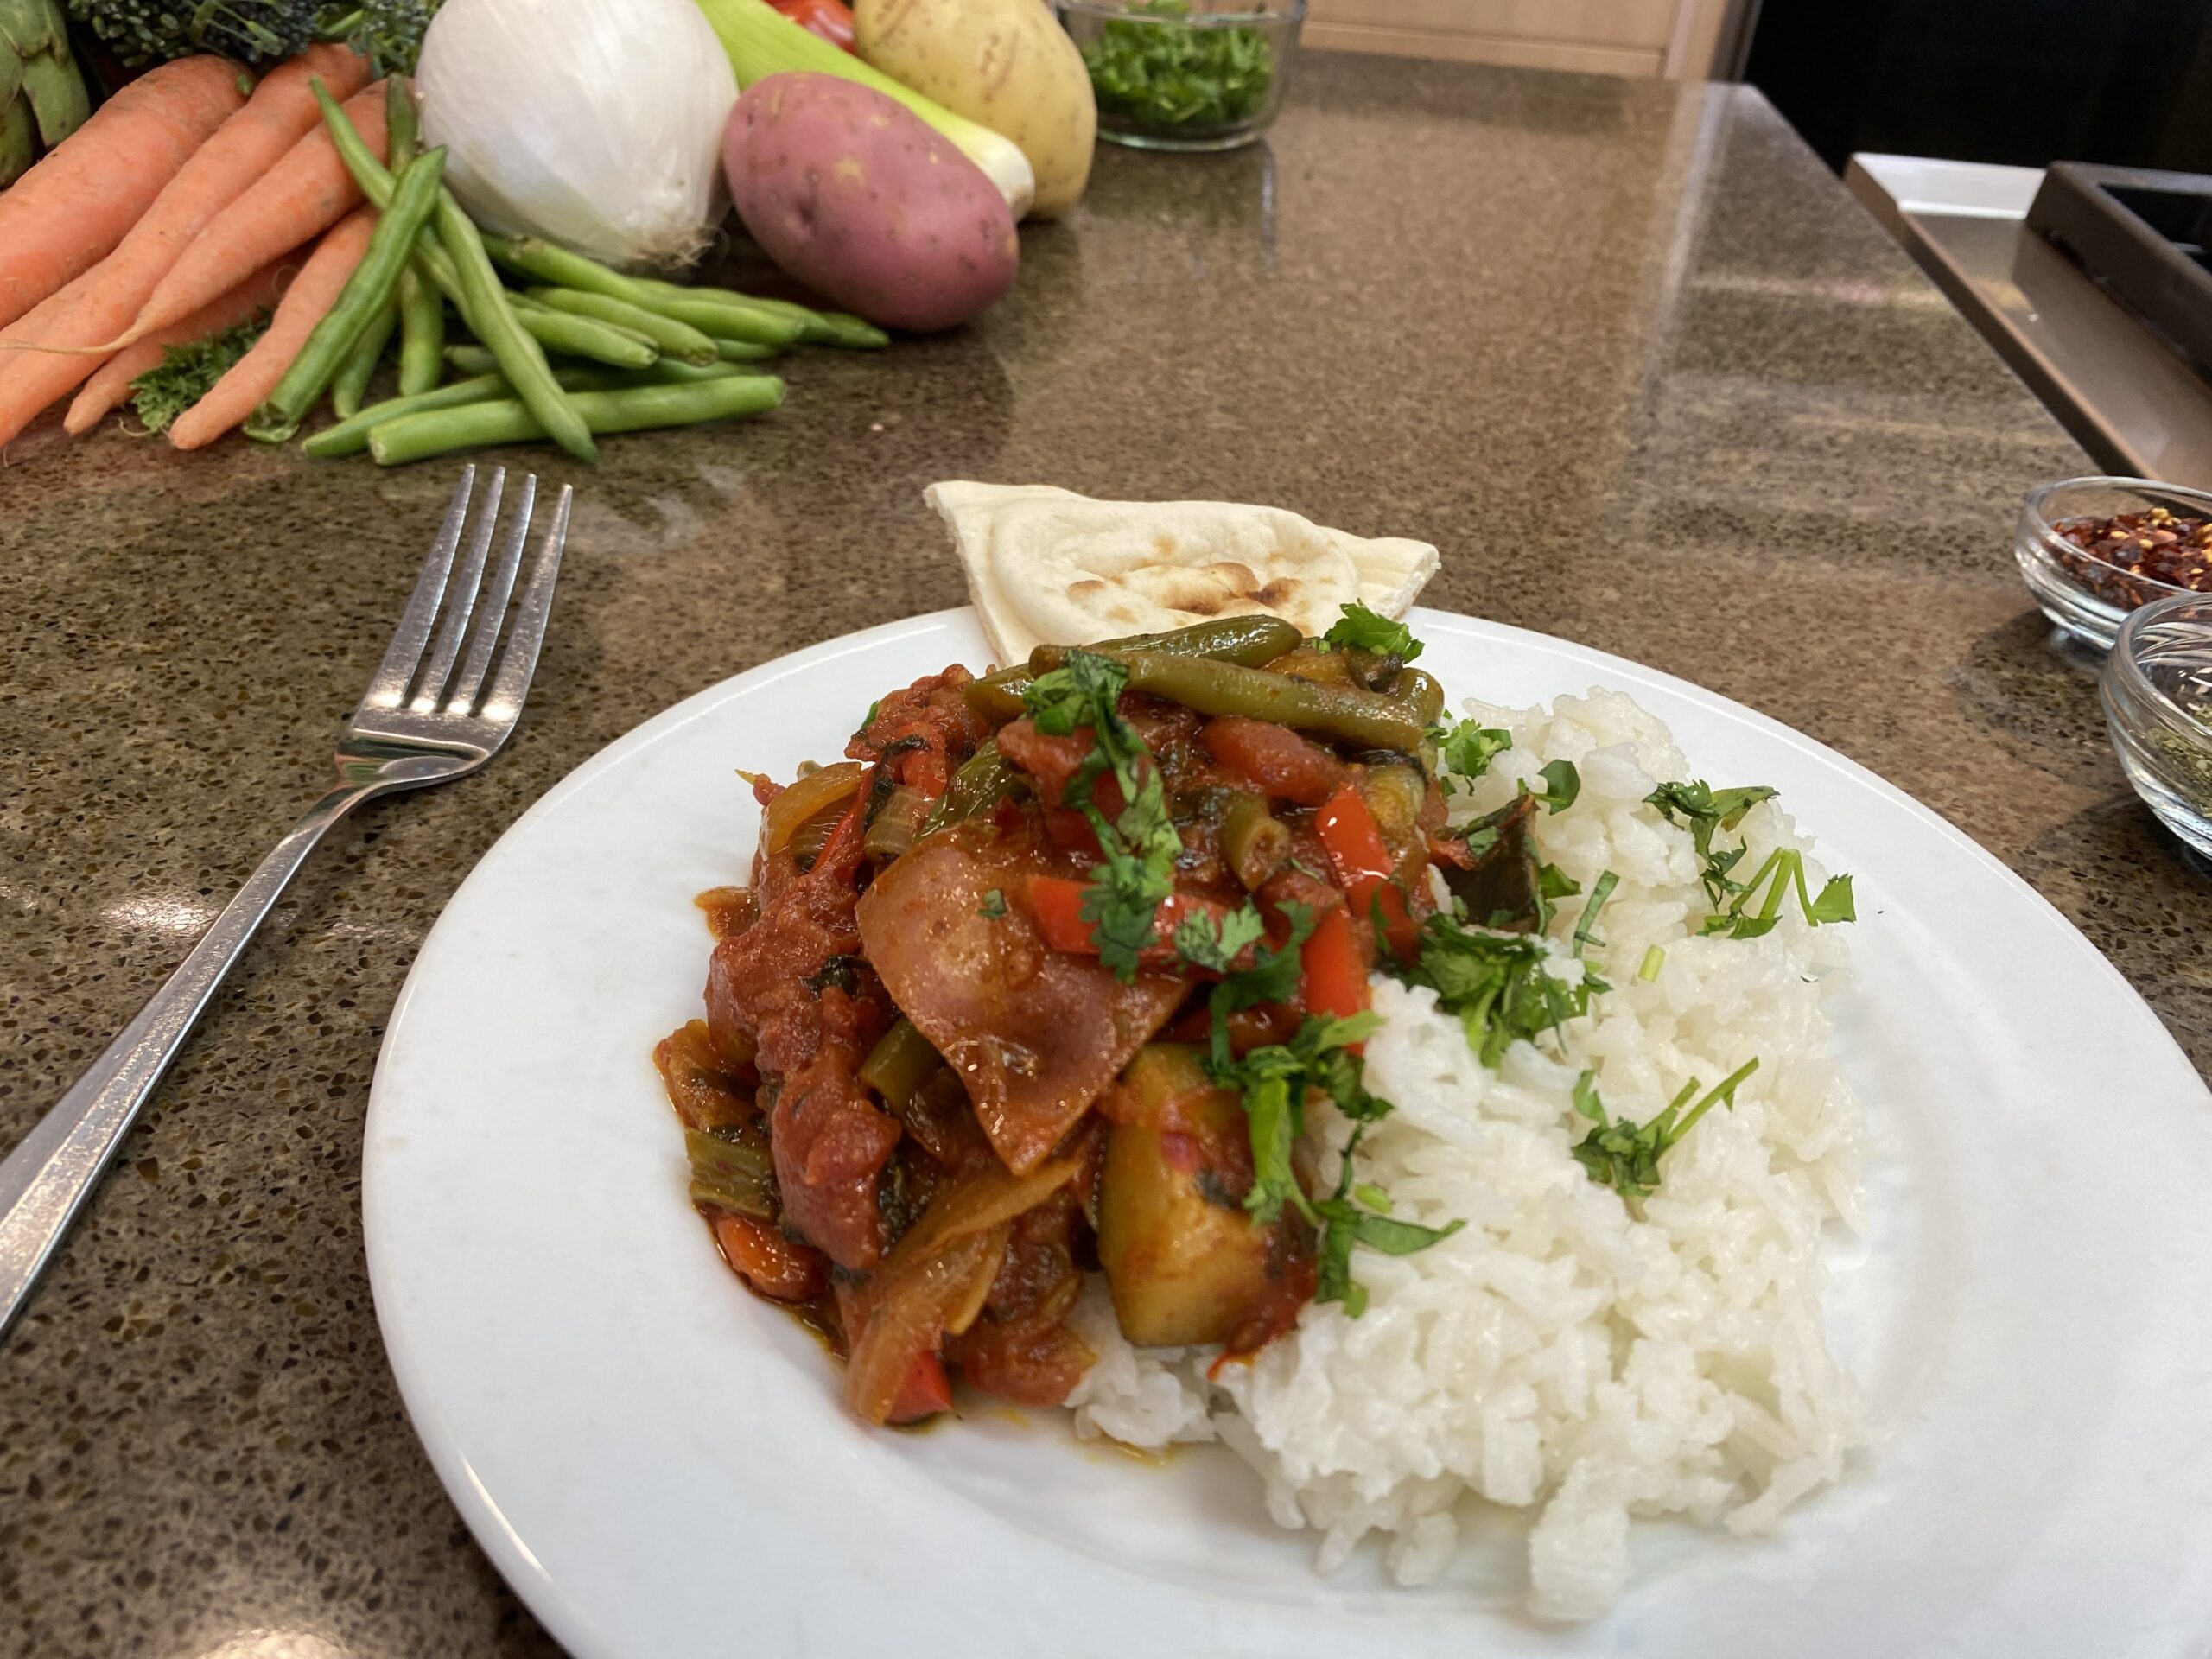 An Afghan-style vegetable korma dish, prepared with rice and naan